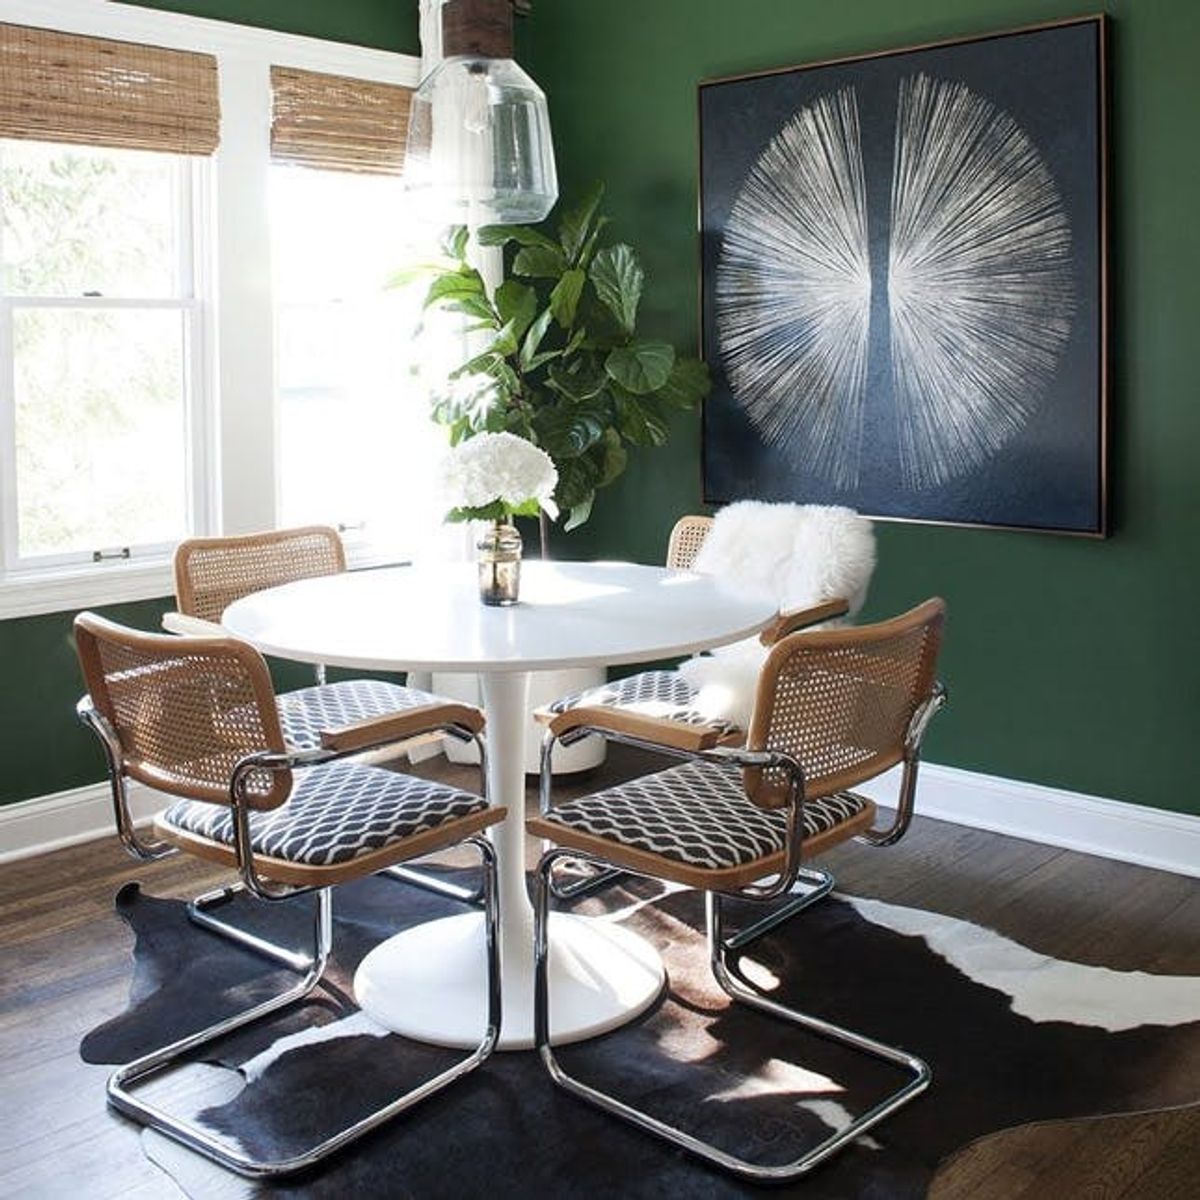 5 Statement-Making Paint Colors We’re Considering for Spring